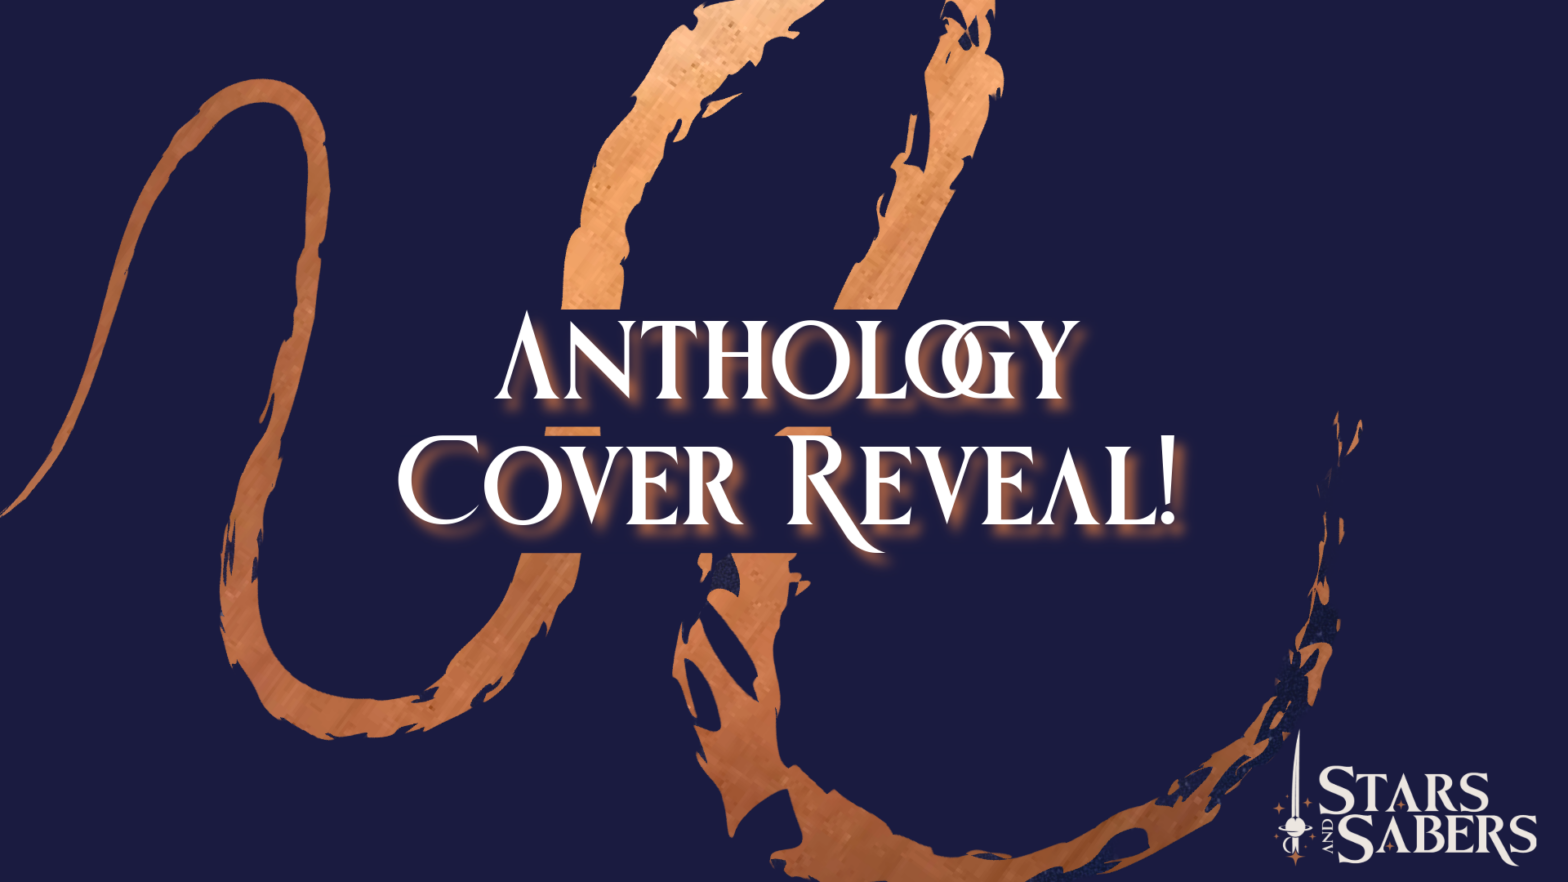 Anthology Cover Reveal!